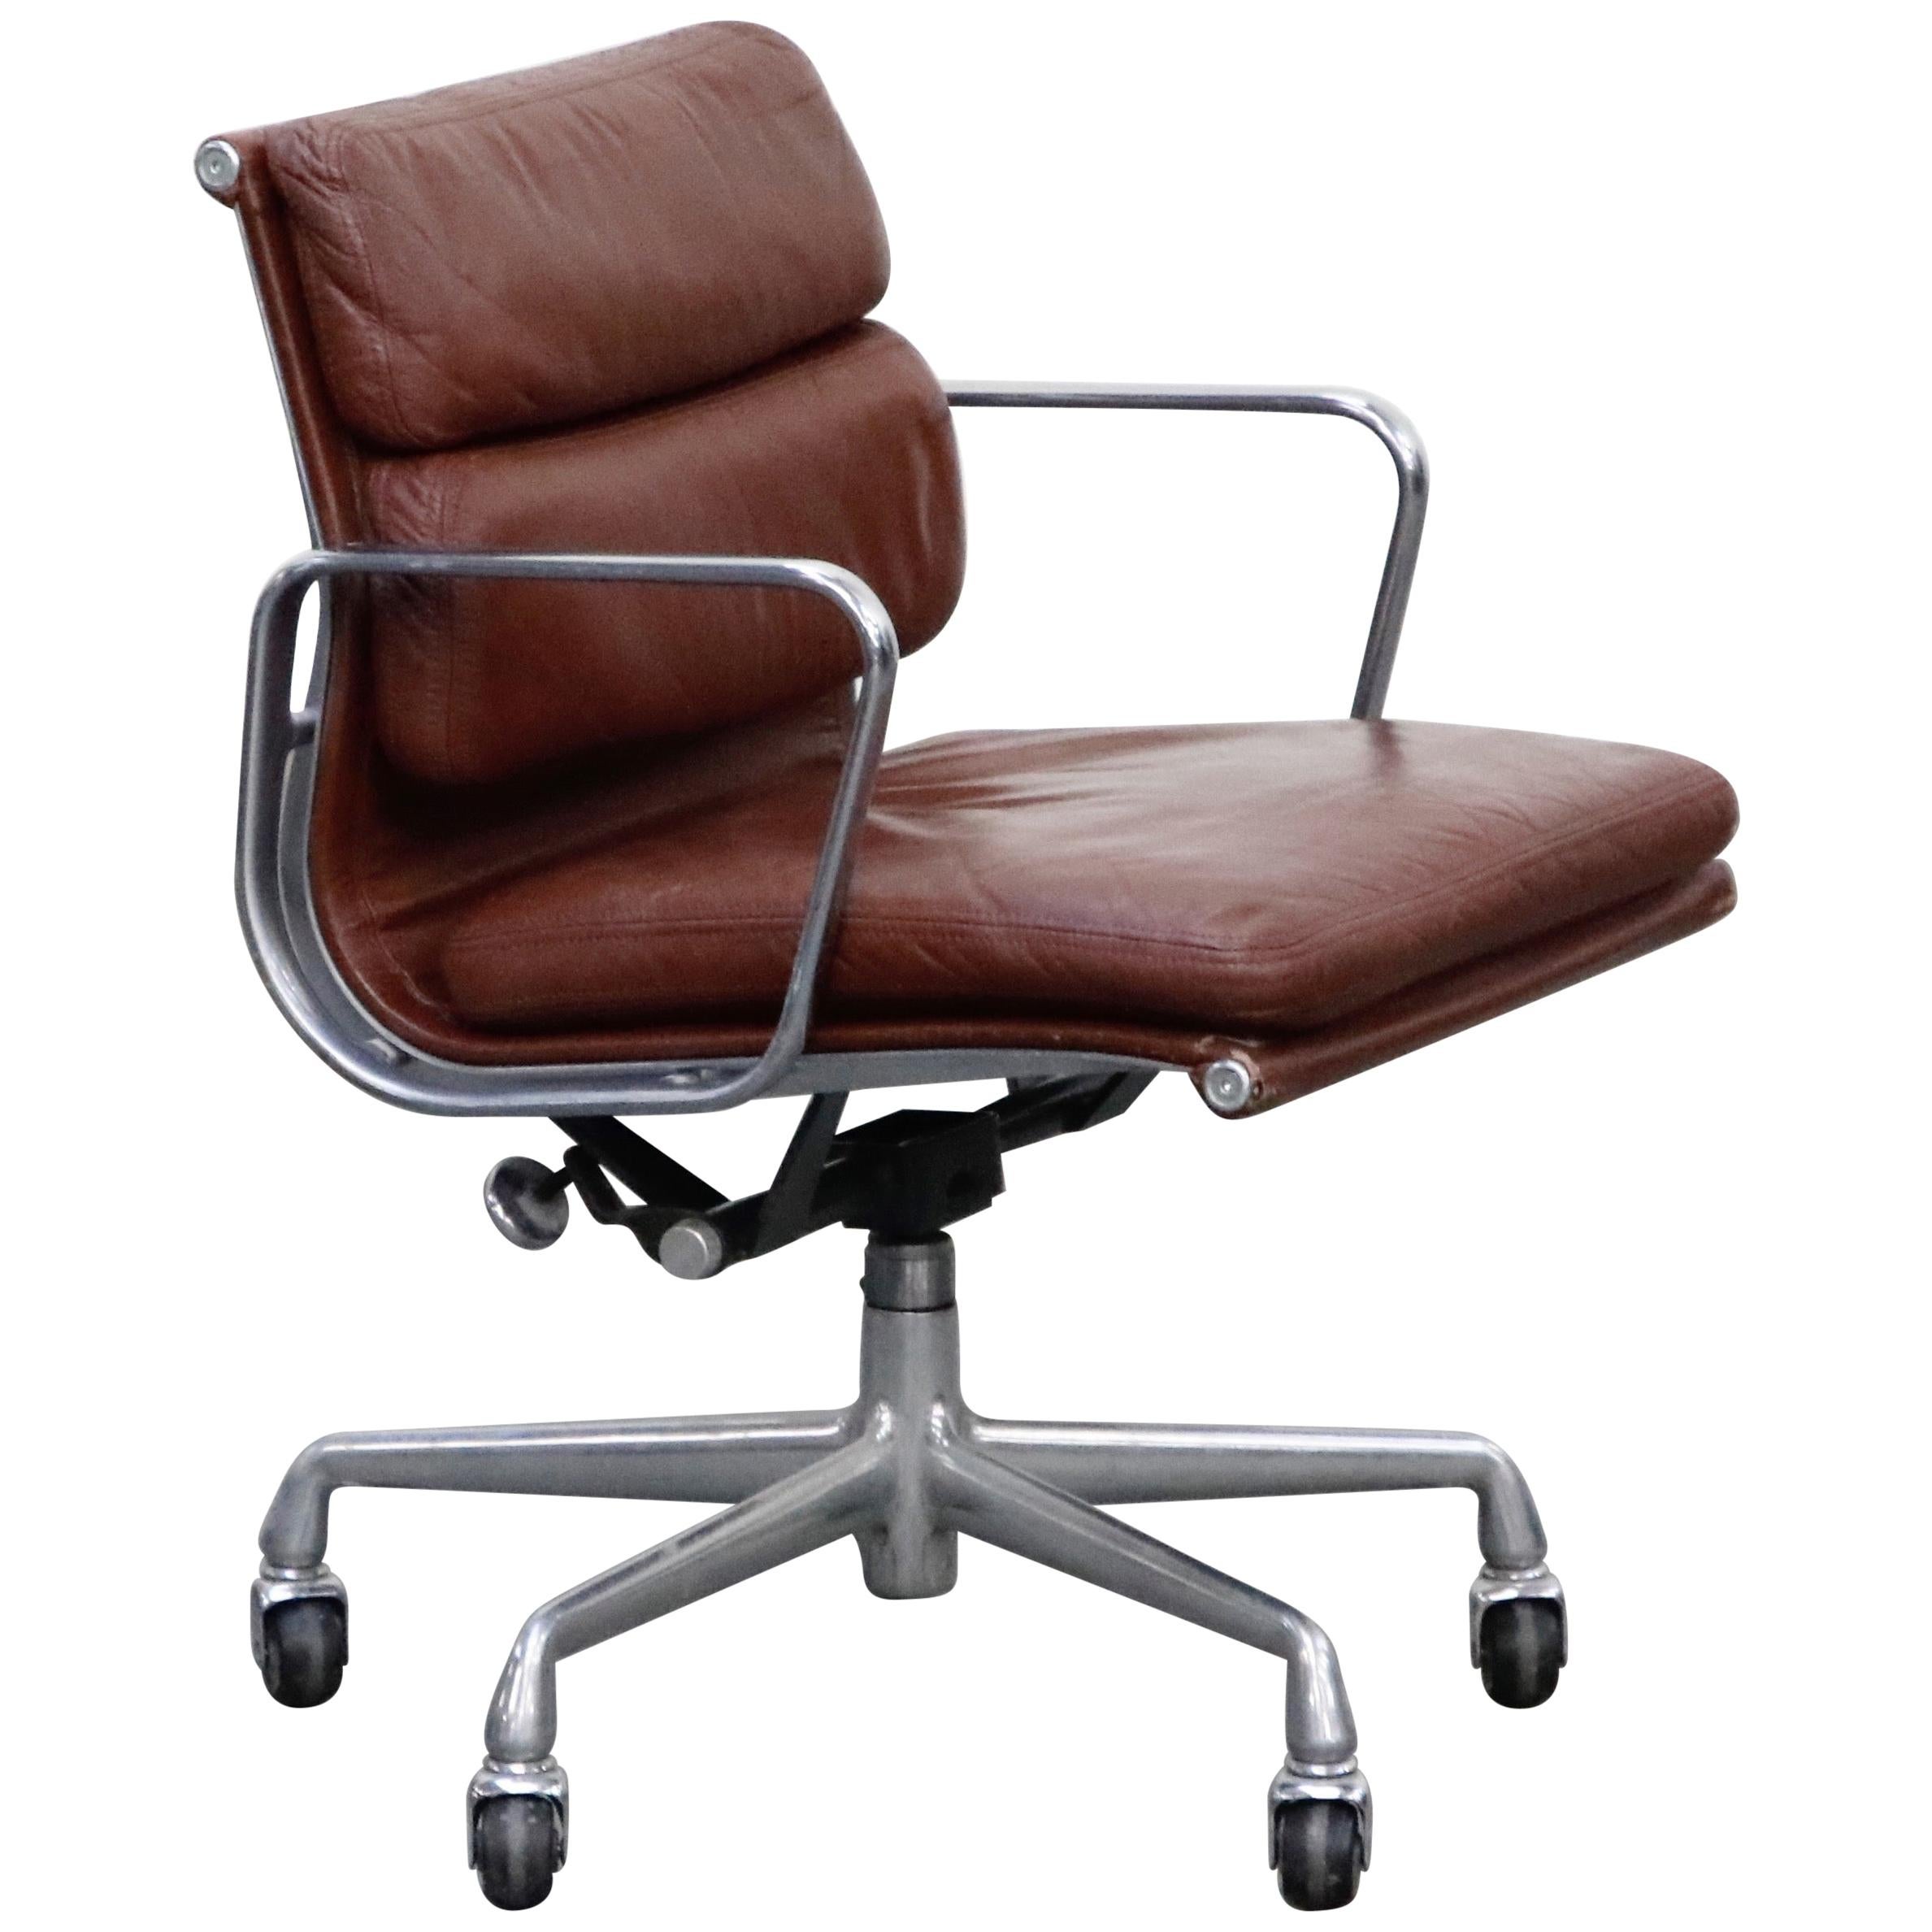 https://a.1stdibscdn.com/charles-eames-for-herman-miller-brown-leather-soft-pad-management-chair-signed-for-sale/1121189/f_183212221584372049423/18321222_master.jpg